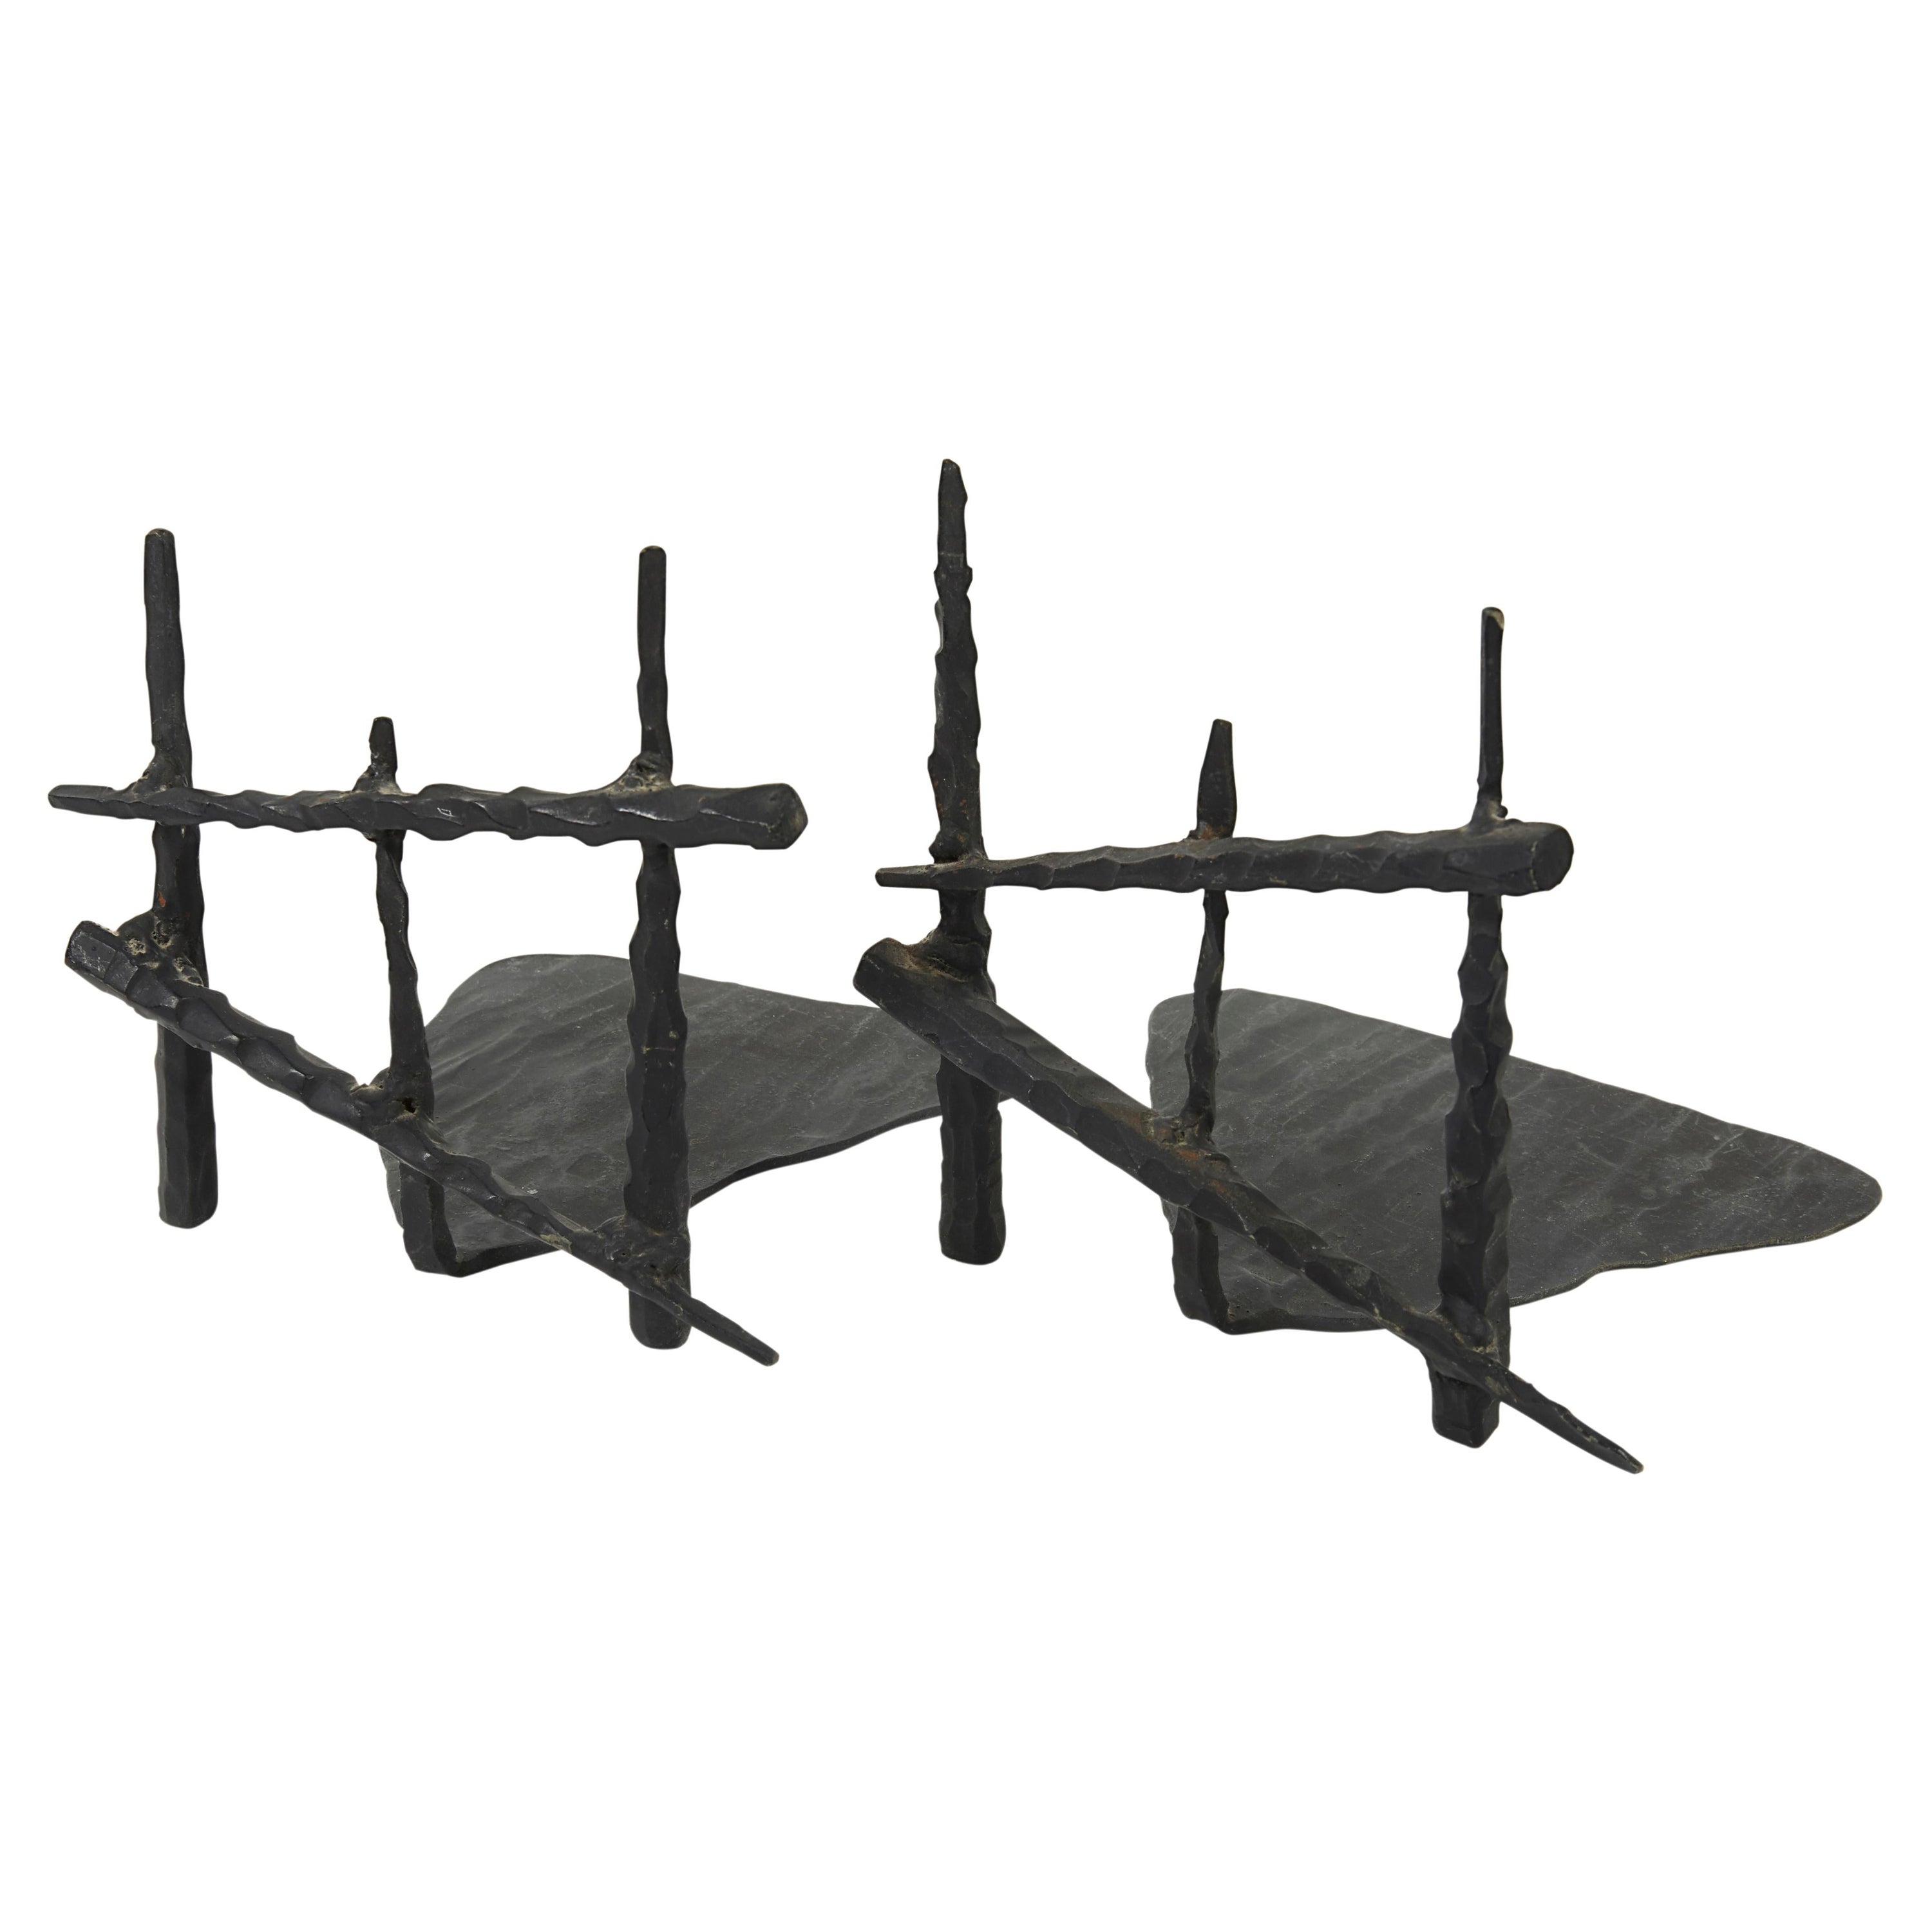 Mid-20th Century Pair of Brutalist Iron Bookends by David Palombo For Sale